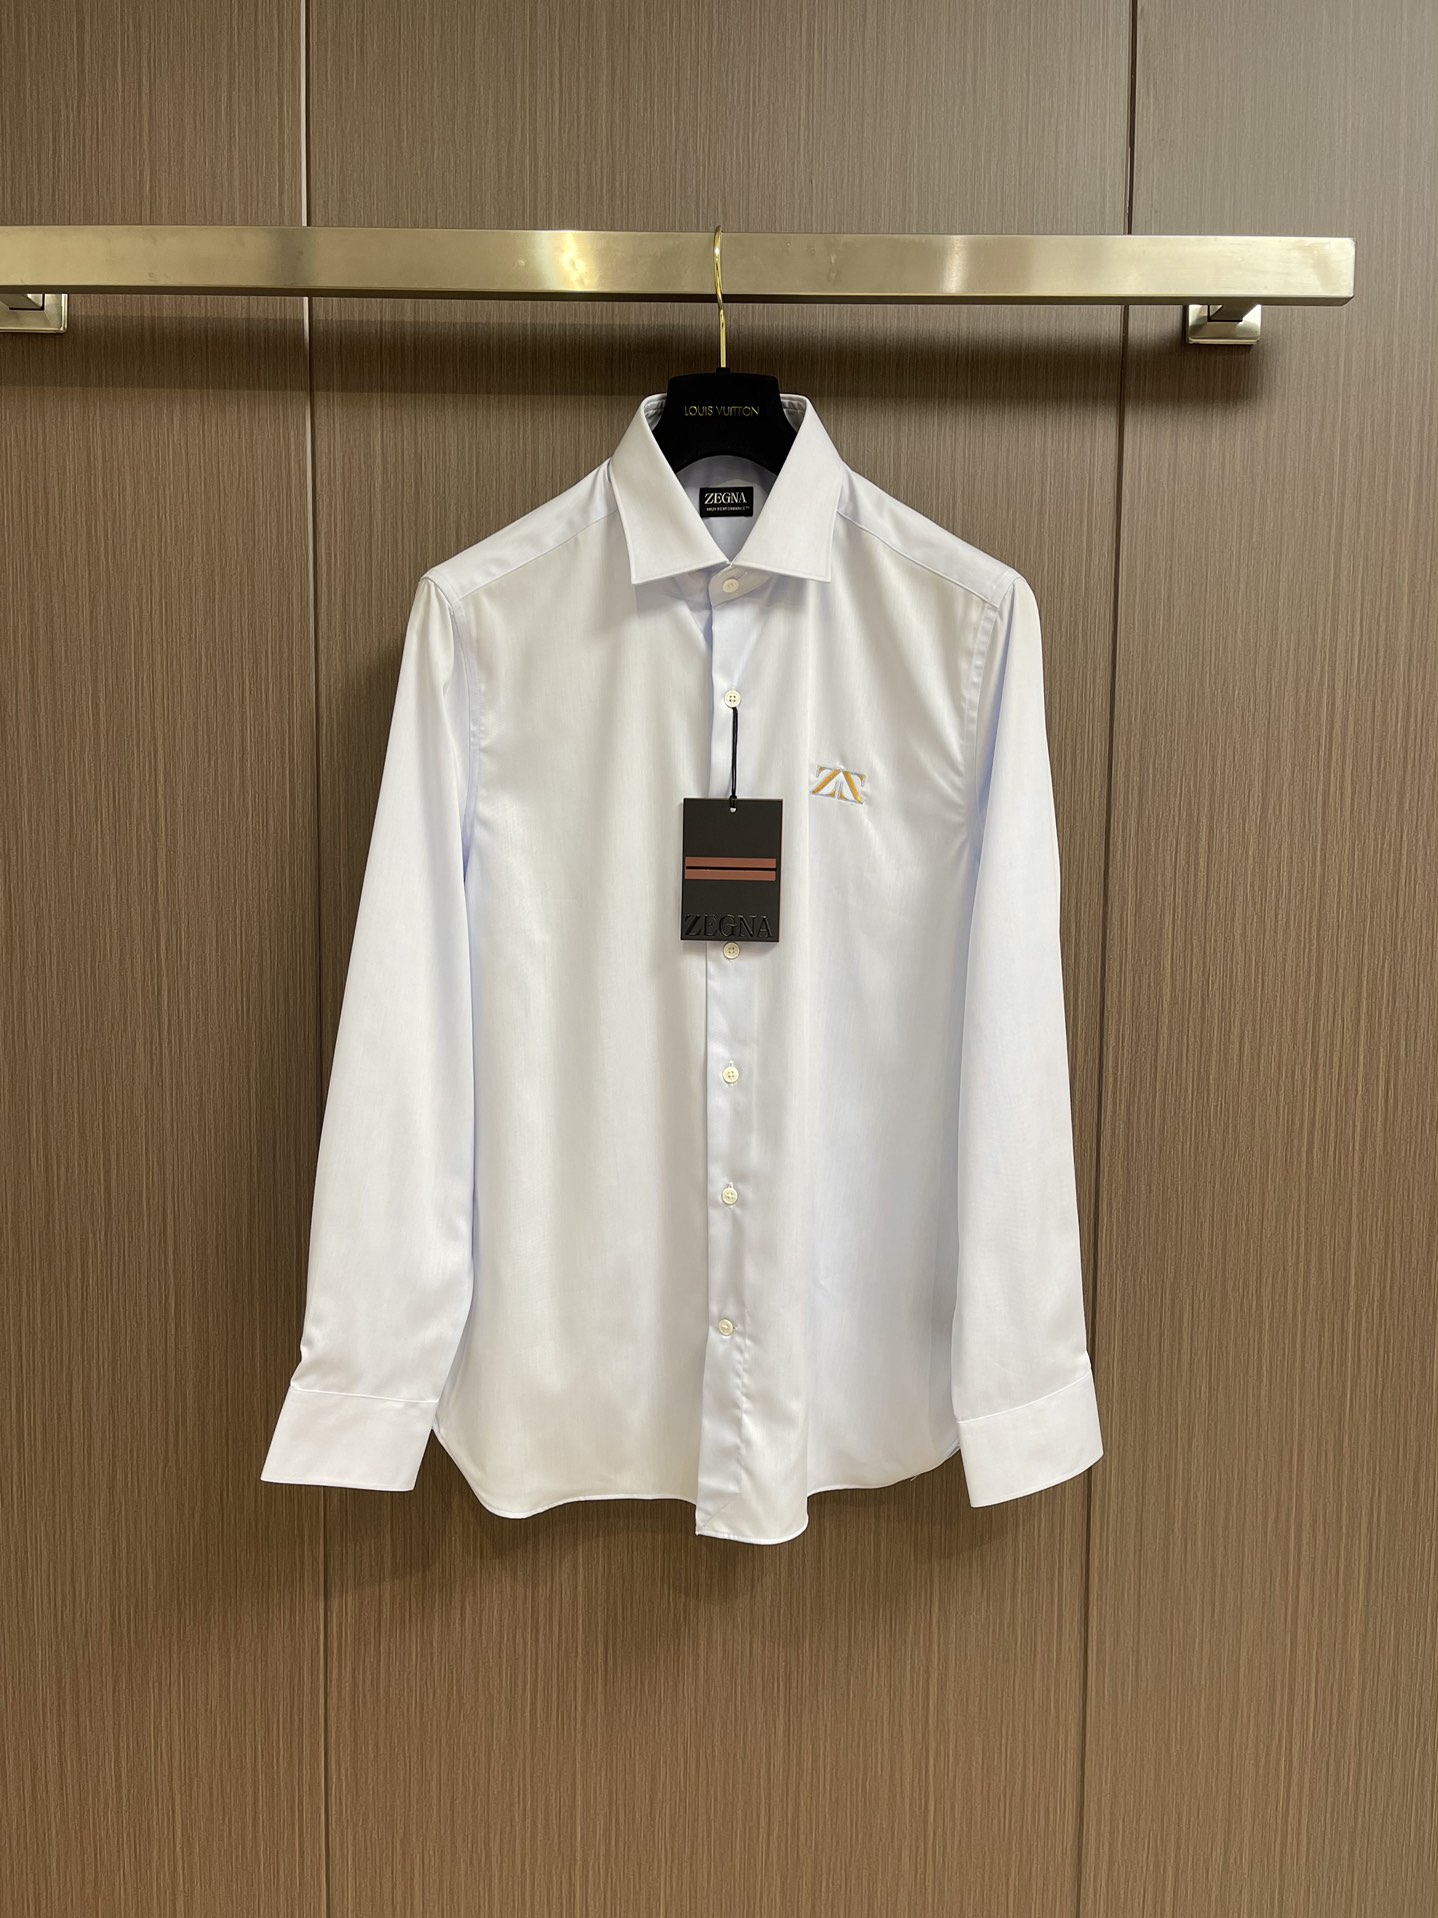 Zegna Replicas
 Clothing Shirts & Blouses Knockoff Highest Quality
 White Men Cotton Poplin Fabric Spring/Summer Collection